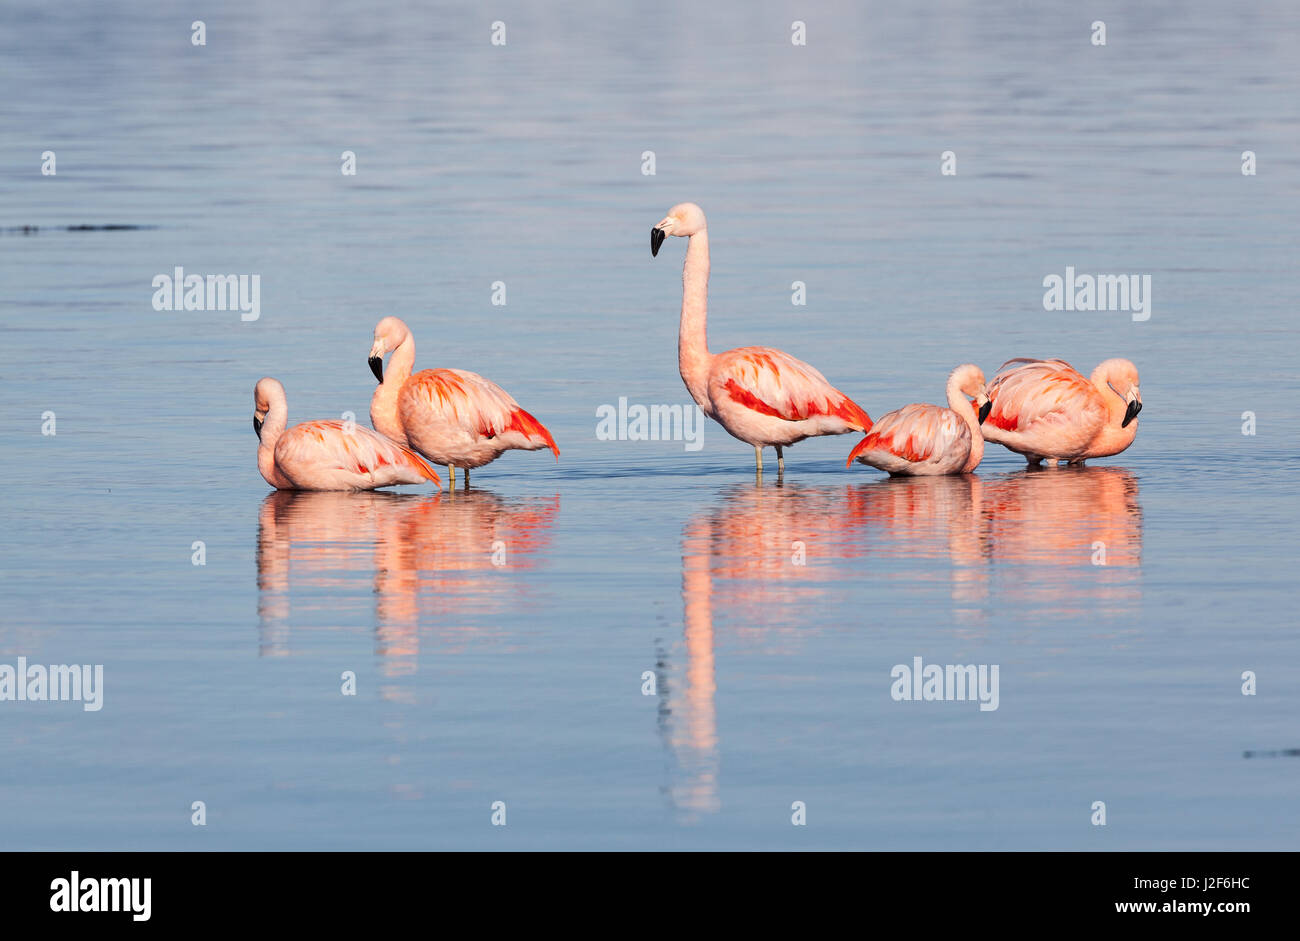 Group of Chilean Flamingo's standing in sea Stock Photo